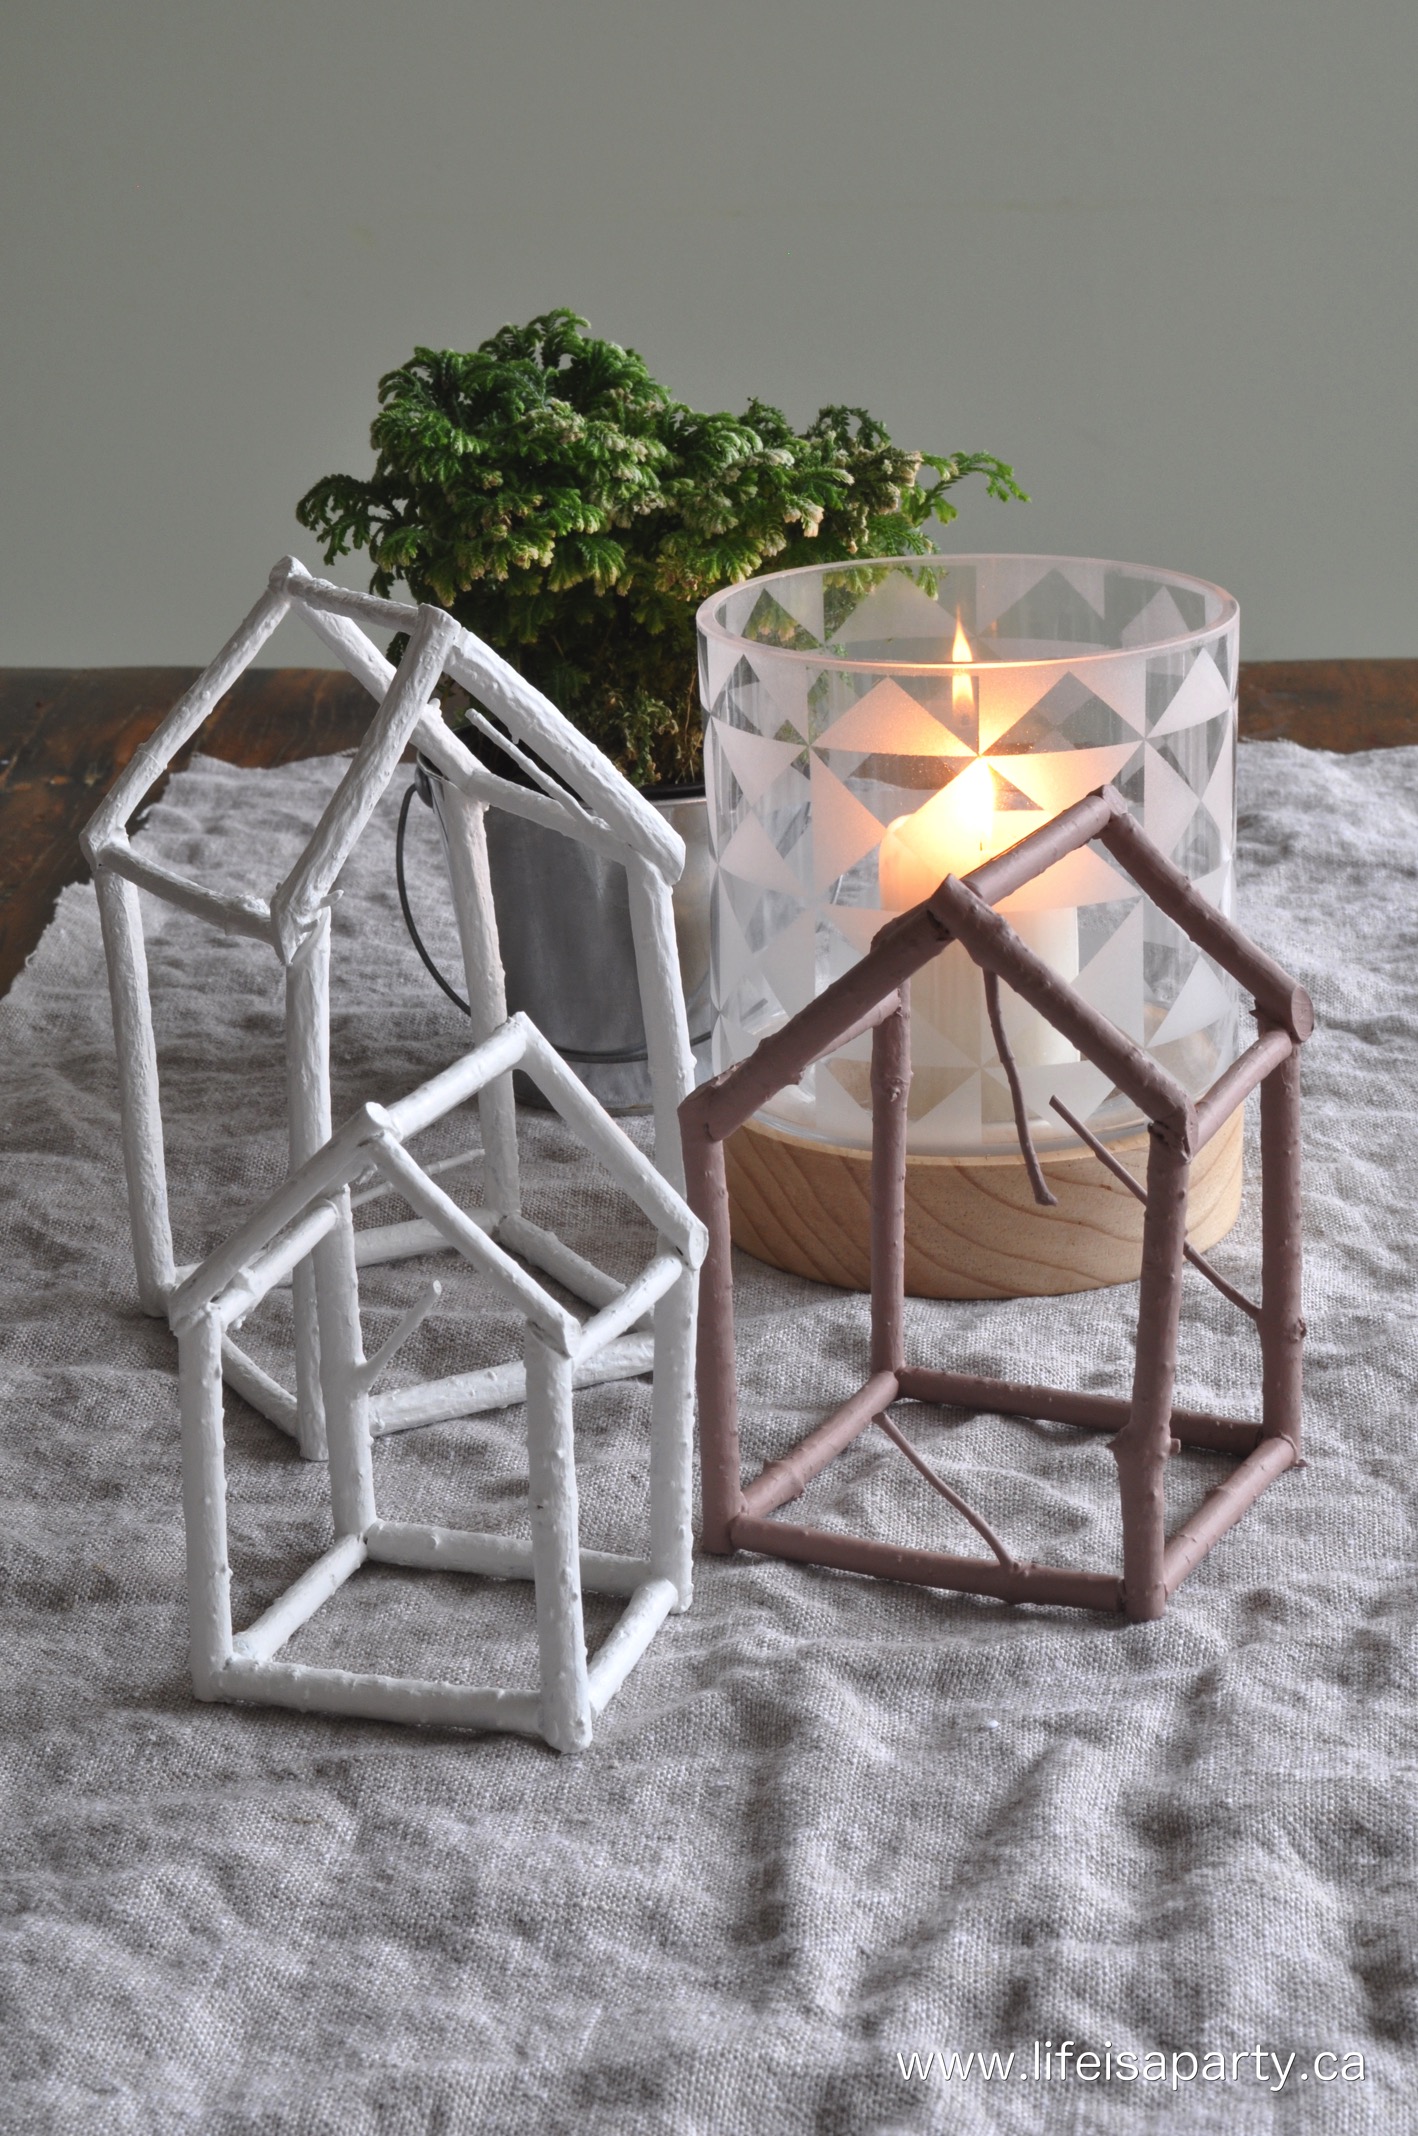 Twig Houses: Easy DIY with twigs, glue, and paint to make these decorative twig houses.